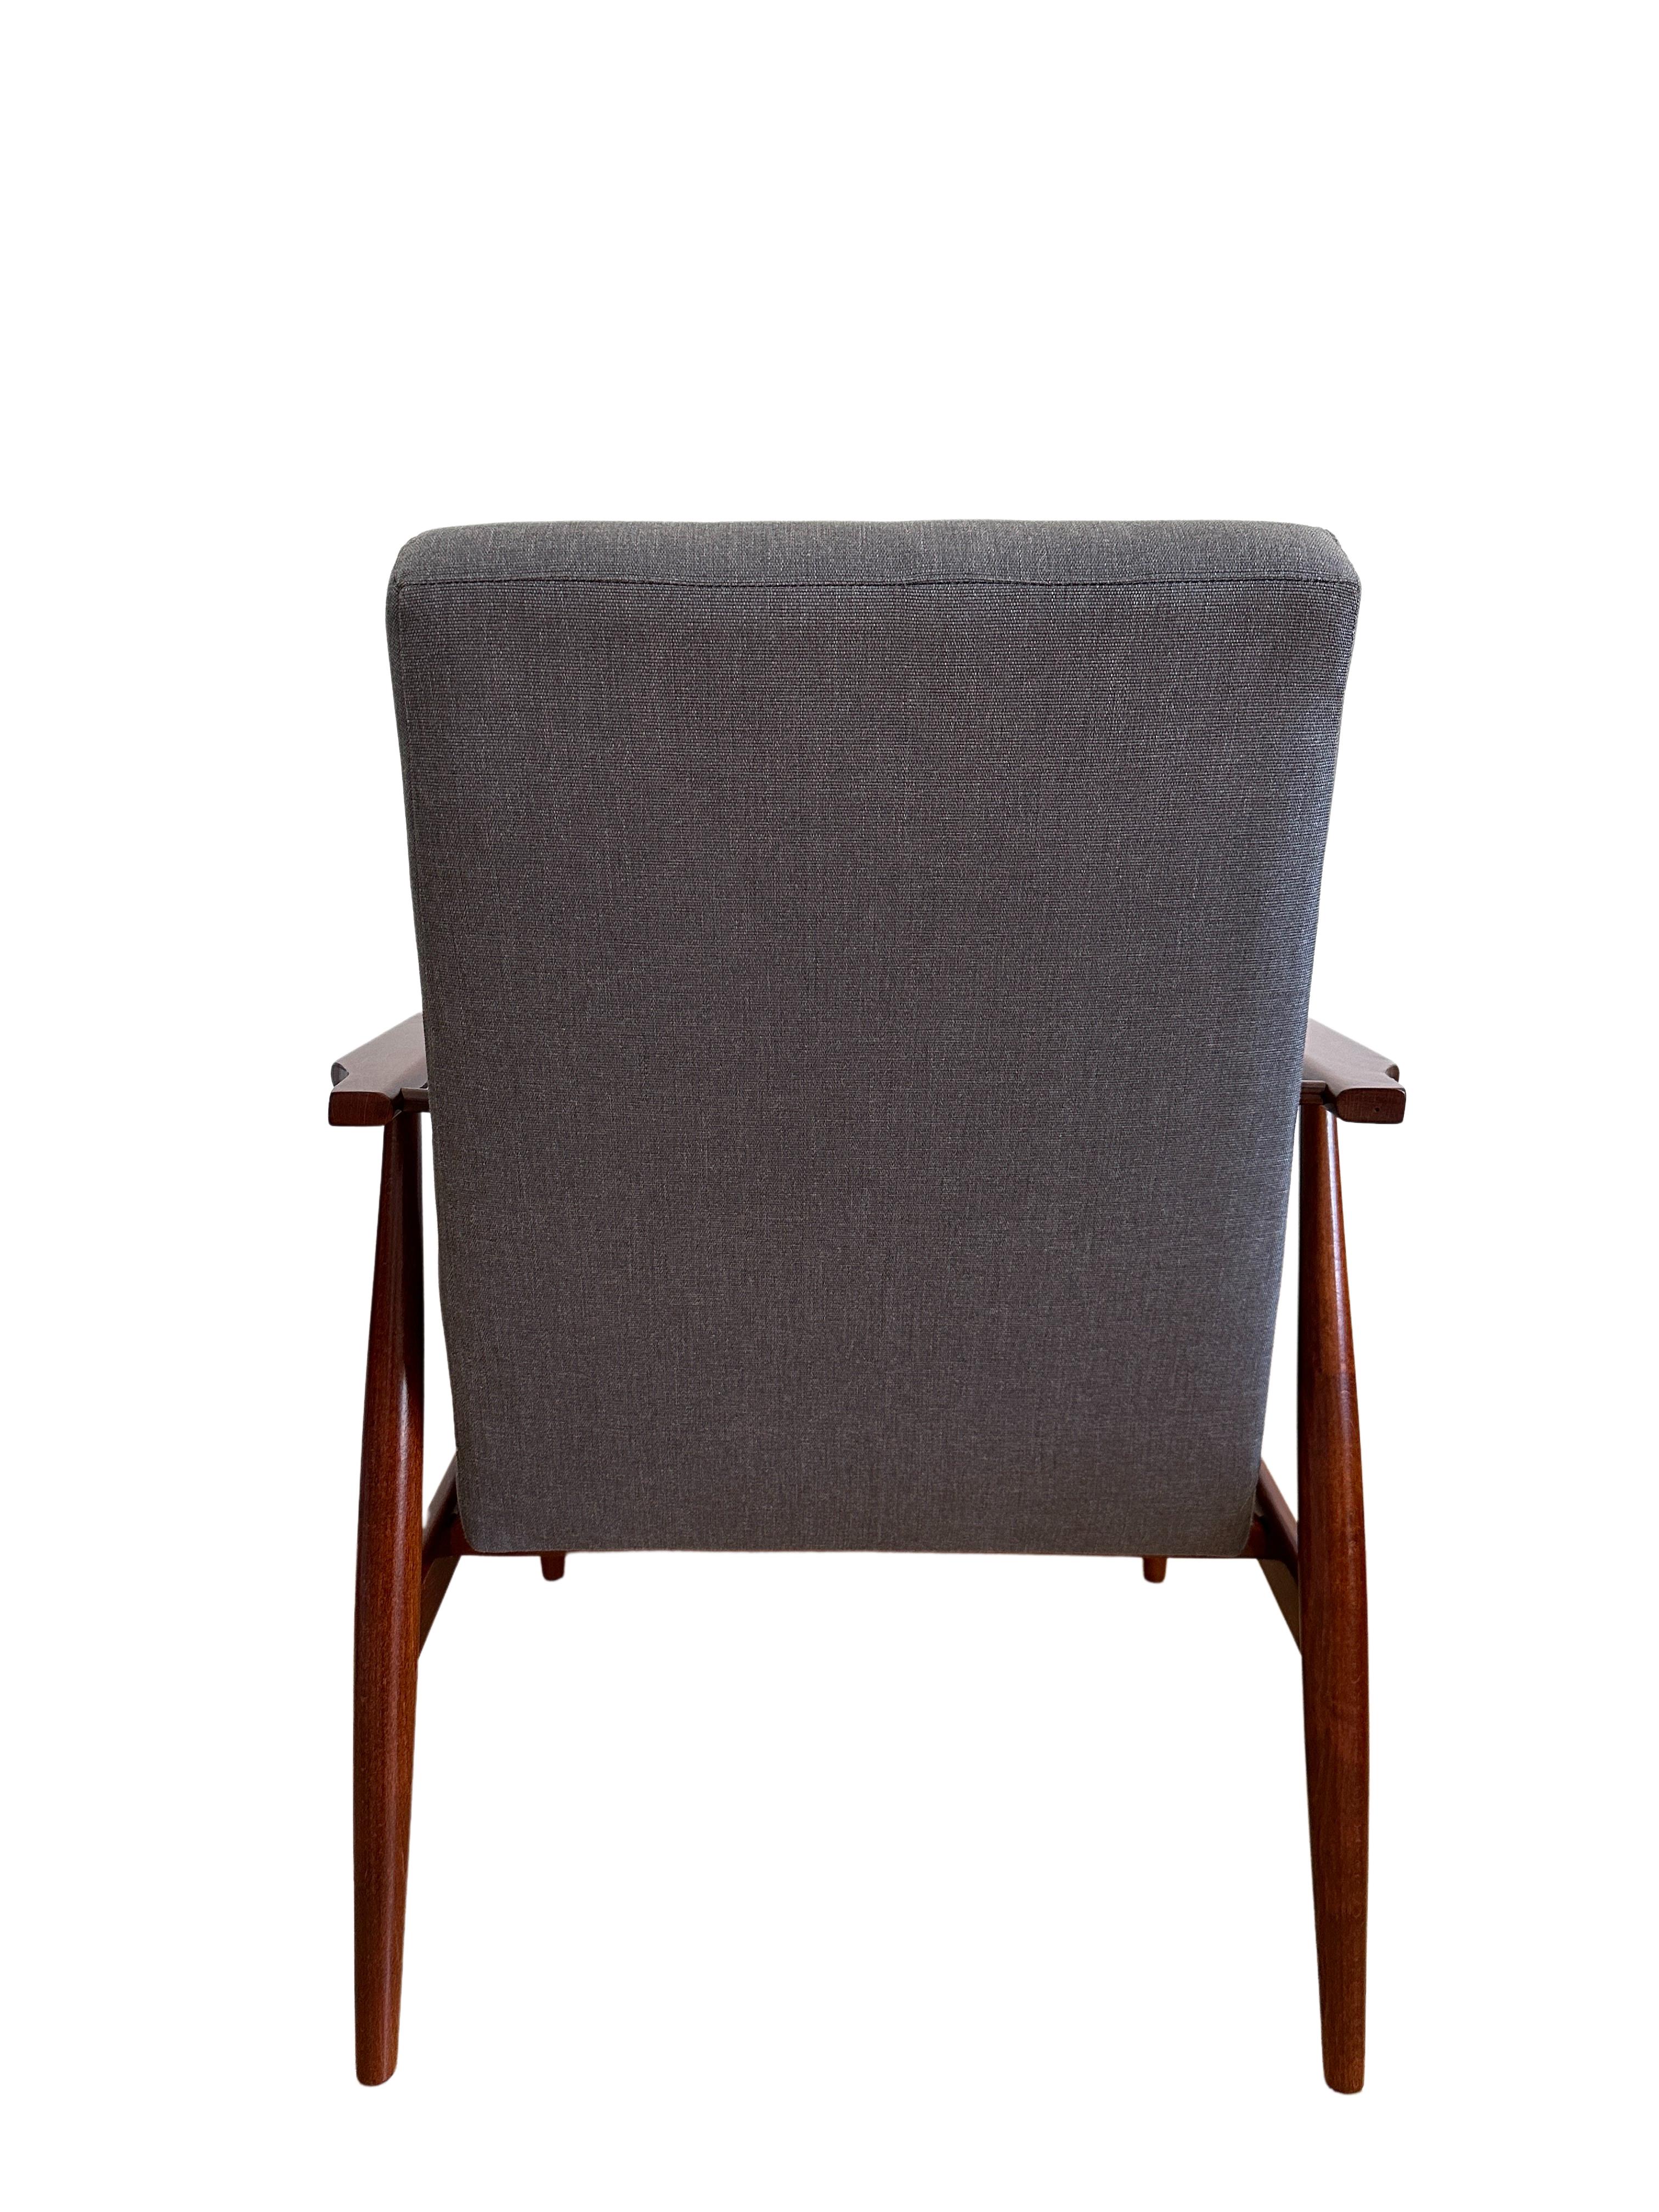 Mid-Century Modern Set of Two Grey Armchairs in Kvadrat Upholstery by Henryk Lis, Europe, 1960s For Sale